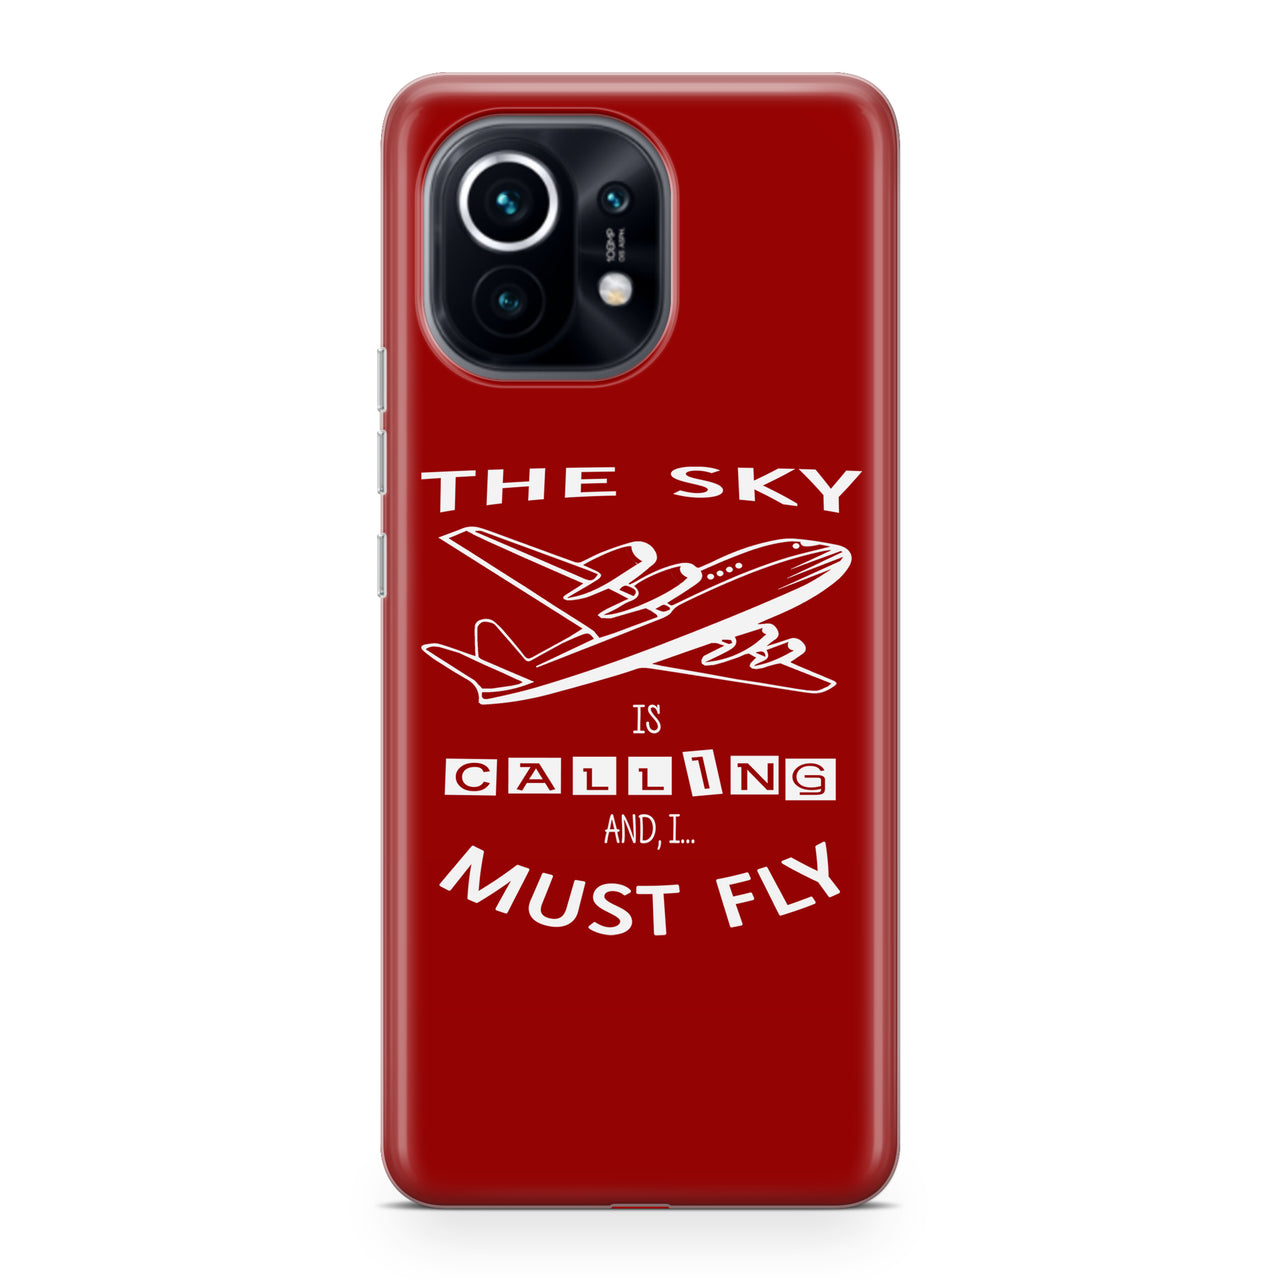 The Sky is Calling and I Must Fly Designed Xiaomi Cases